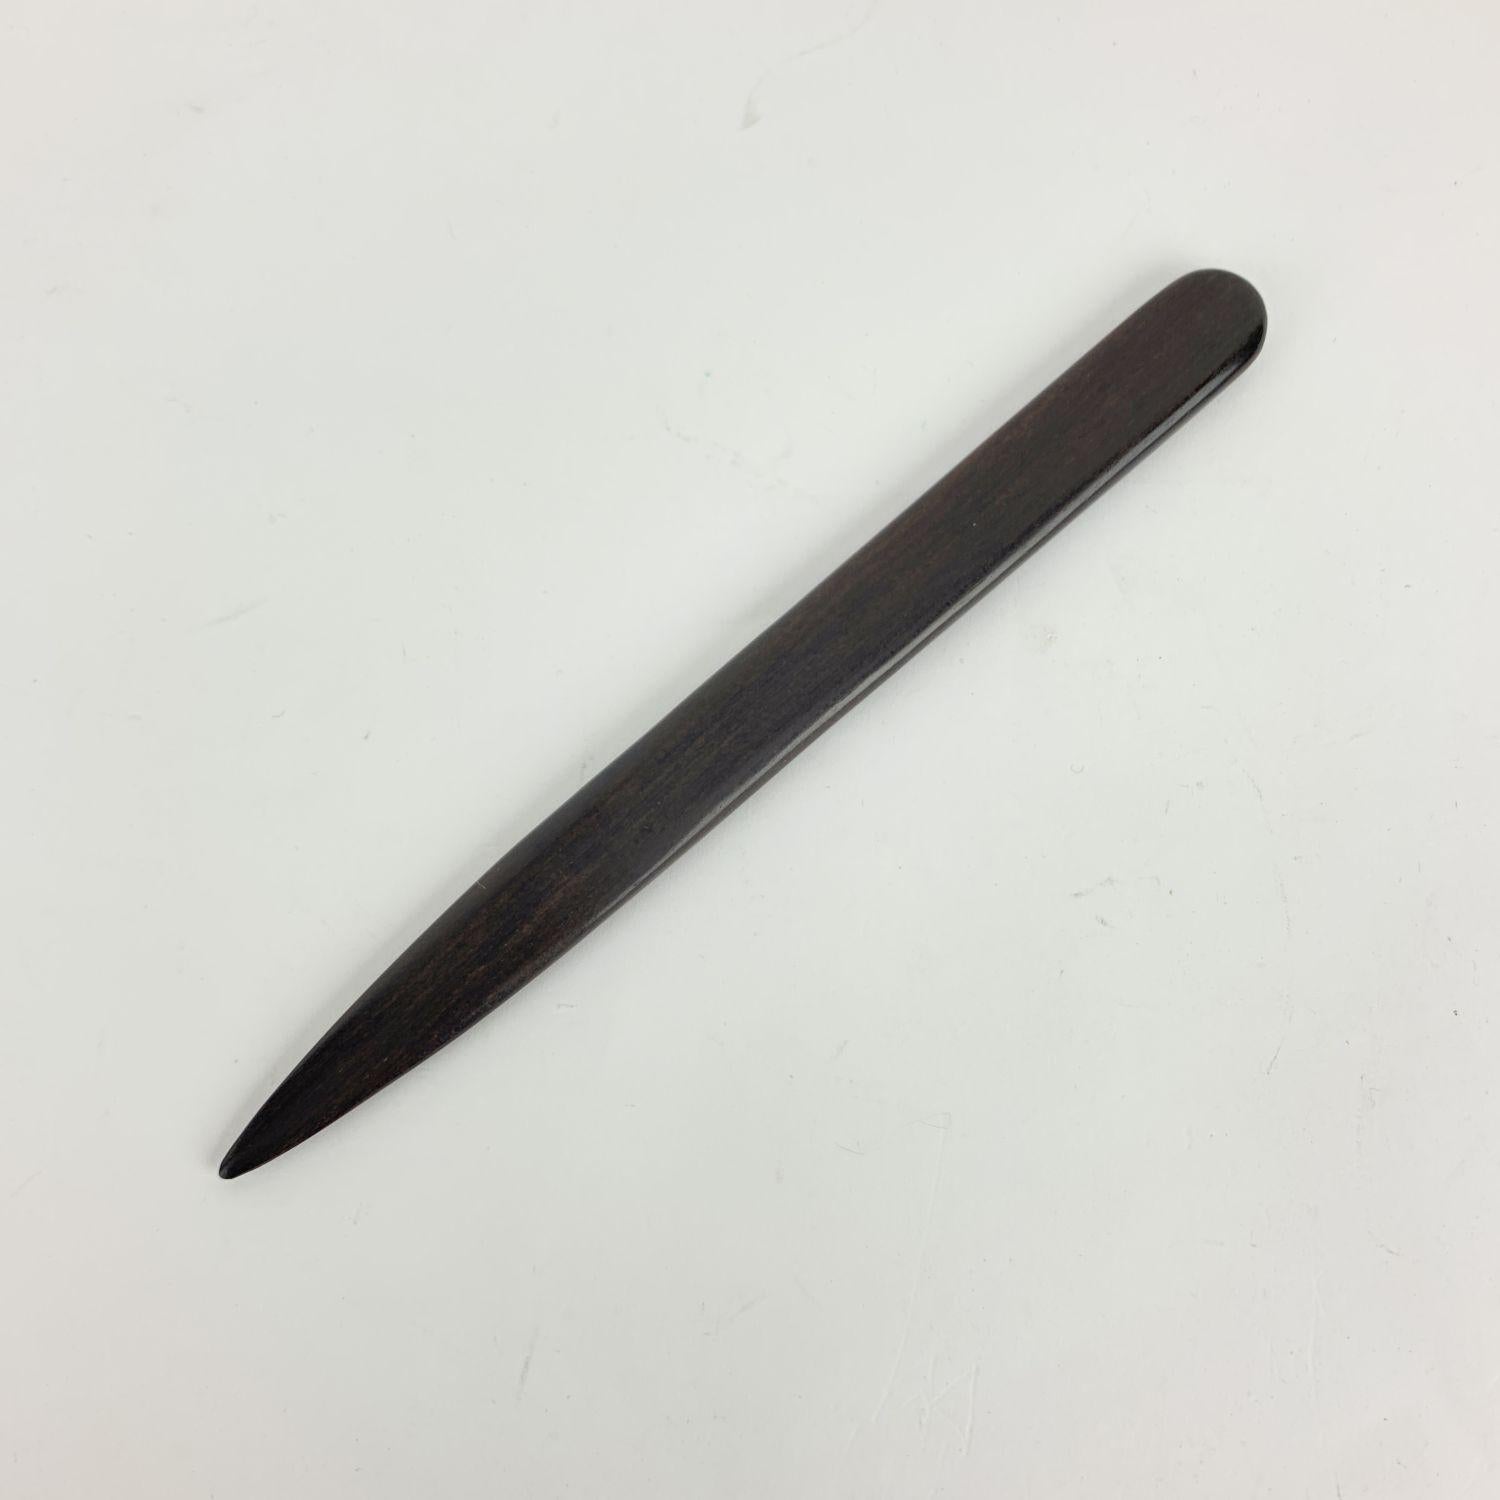 Limited edition Louis Vuitton letter opener made in brown mahogany wood. Mother of pearls inlays representing the iconic LV monogram and logos. Total length: 7.5 inches - 19 cm .

Details

MATERIAL: Wood

COLOR: Brown

MODEL: Letter Opener

GENDER: